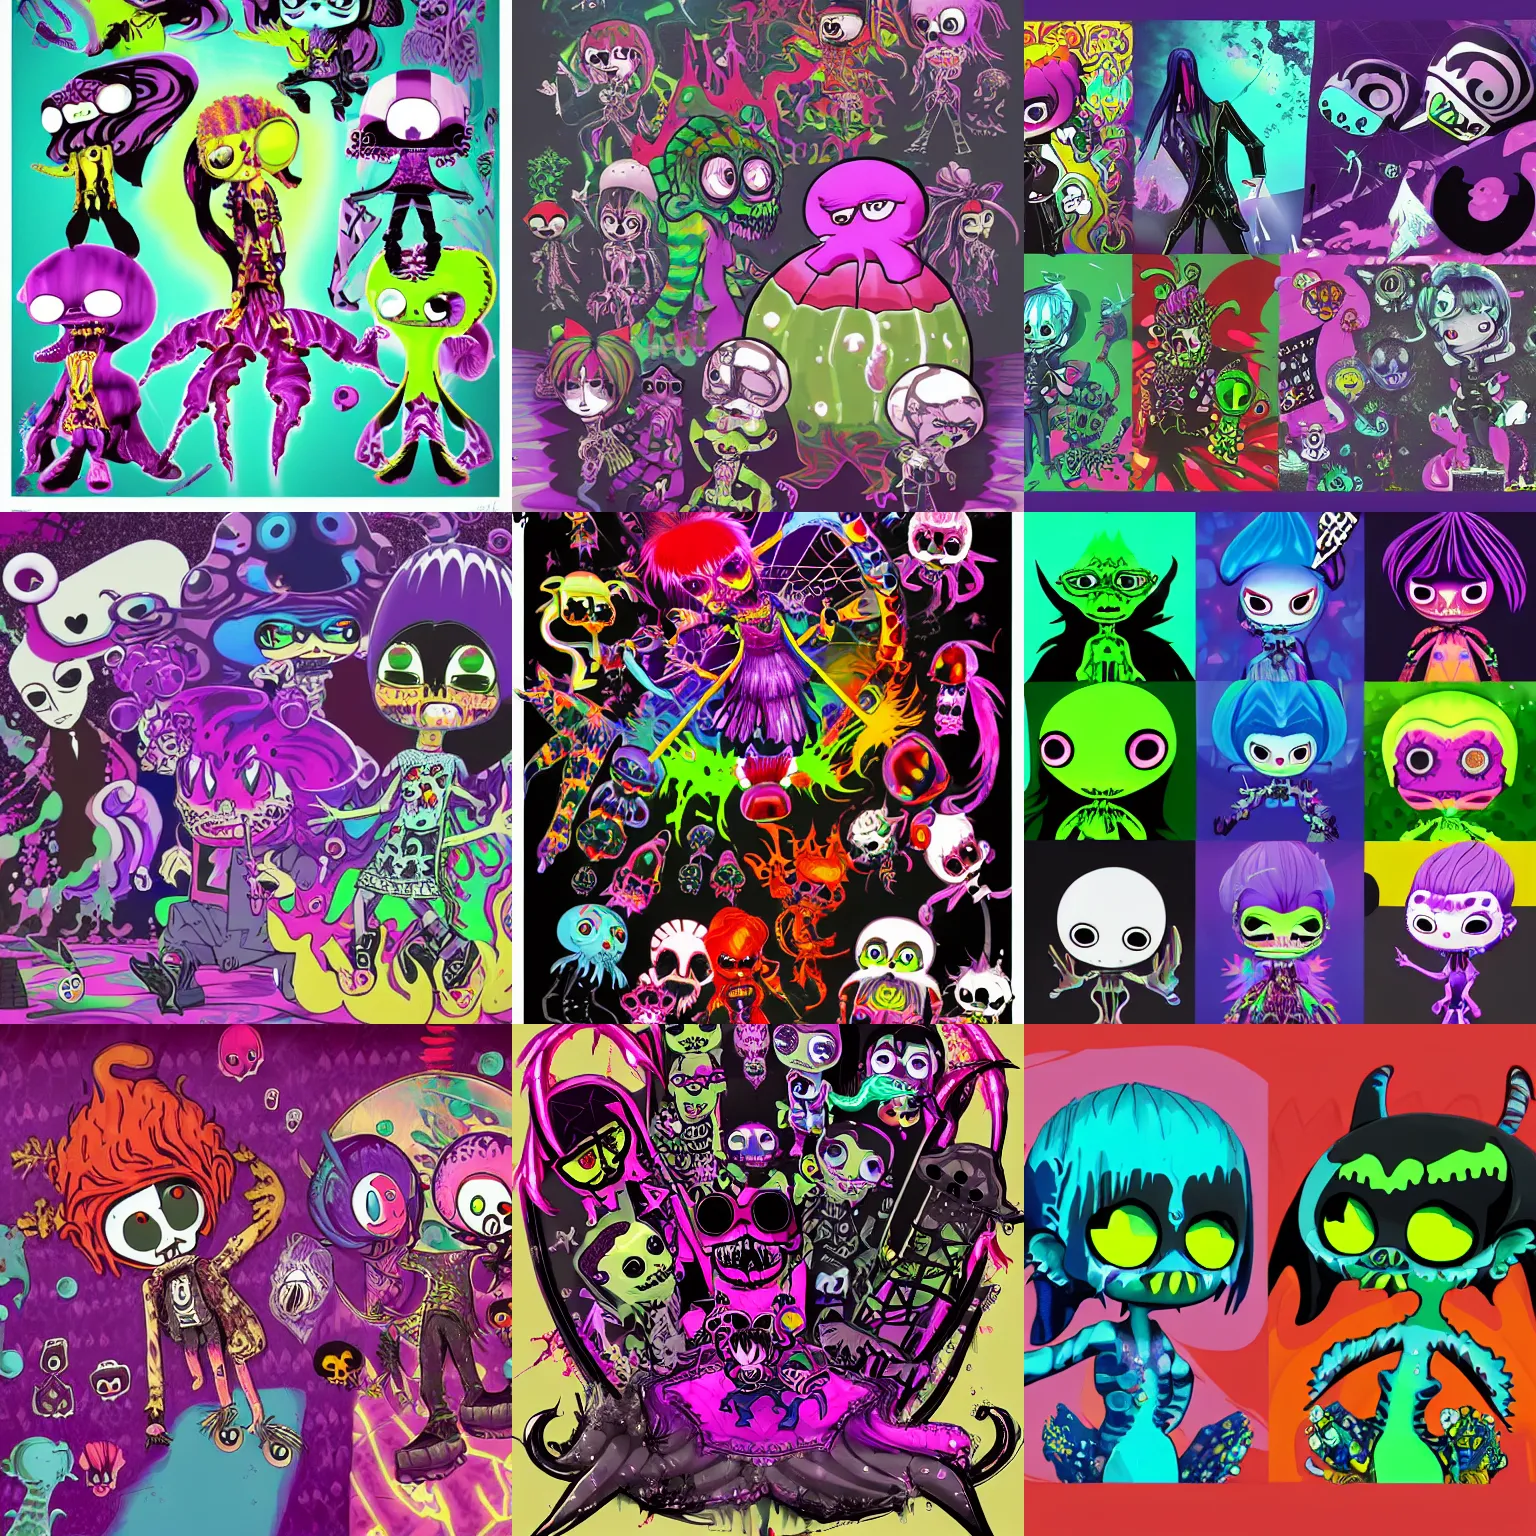 Prompt: CGI lisa frank gothic punk vampiric rockstar underwater caustics vampire squid background designs of various shapes and sizes by genndy tartakovsky and ruby gloom by martin hsu and the creators of fret nice at pieces interactive and splatoon by nintendo and psychonauts by doublefines tim shafer being overseen by Jamie Hewlett from gorillaz for splatoon by nintendo